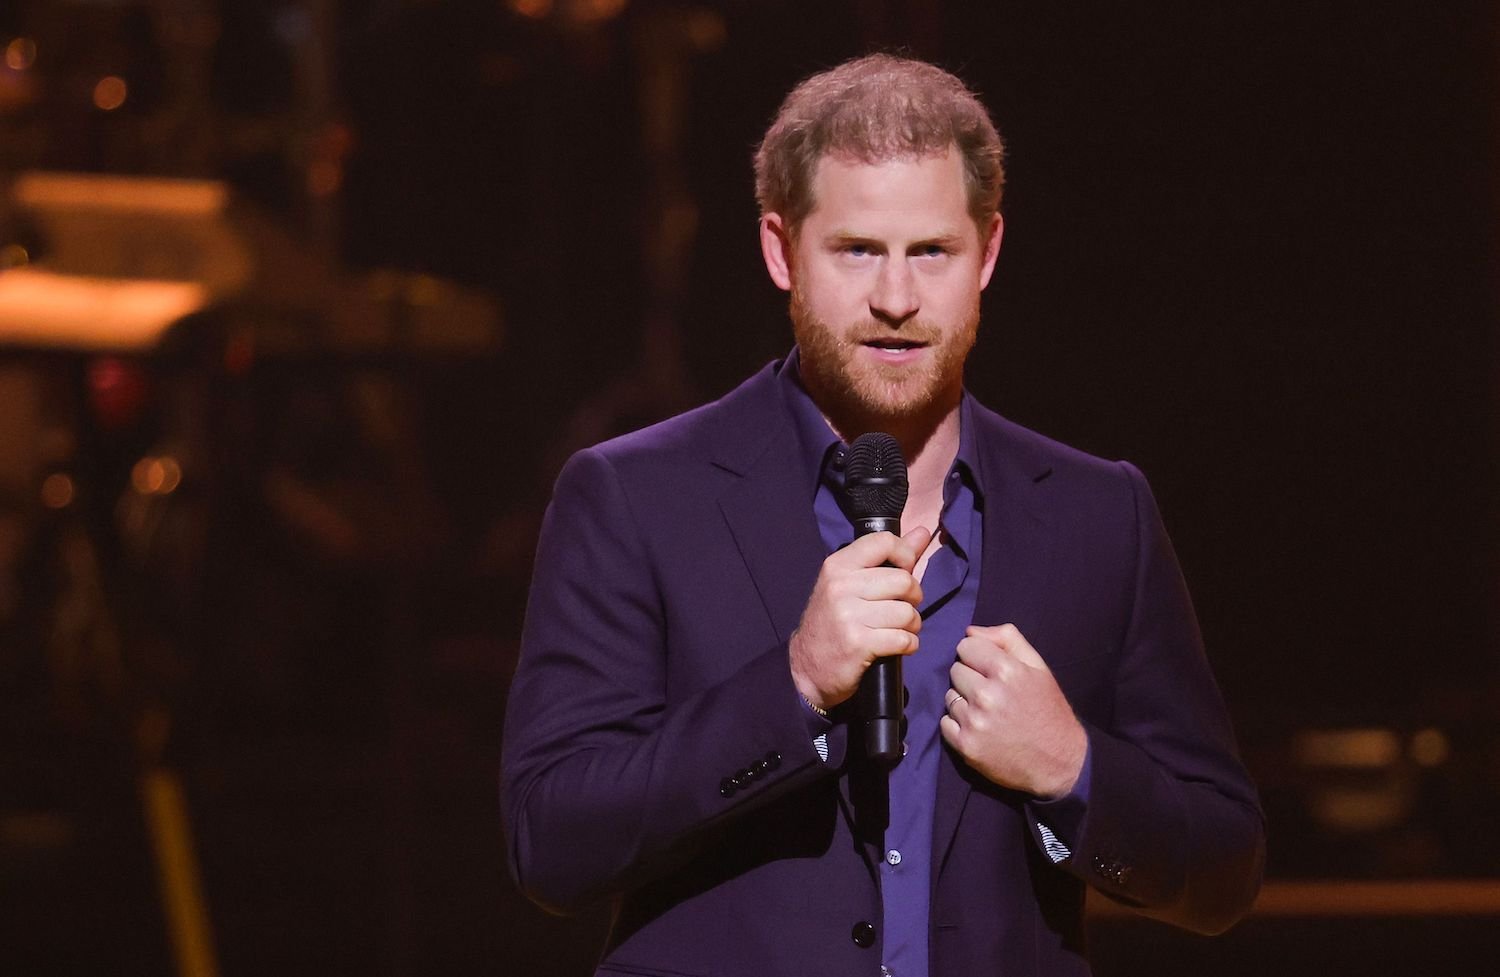 Prince Harry wears a suit and holds a microphone while addressing the audience at the 2022 Invictus Games closing ceremony